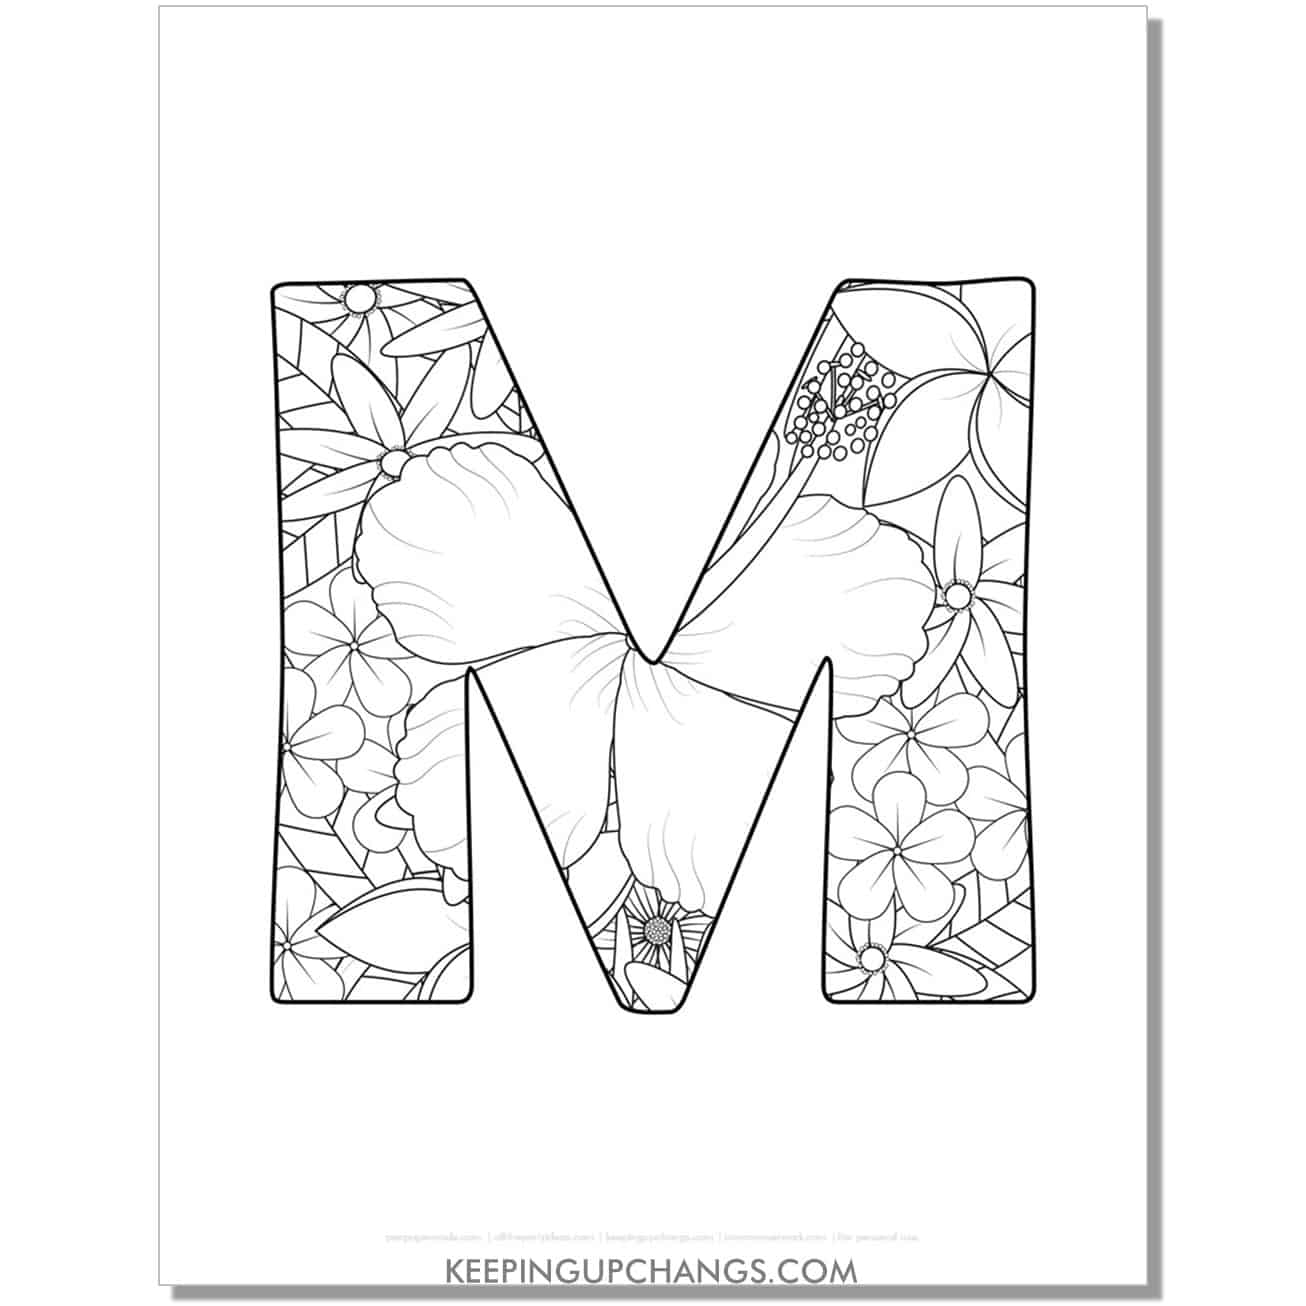 free letter m to color, complex mandala zentangle for adults.